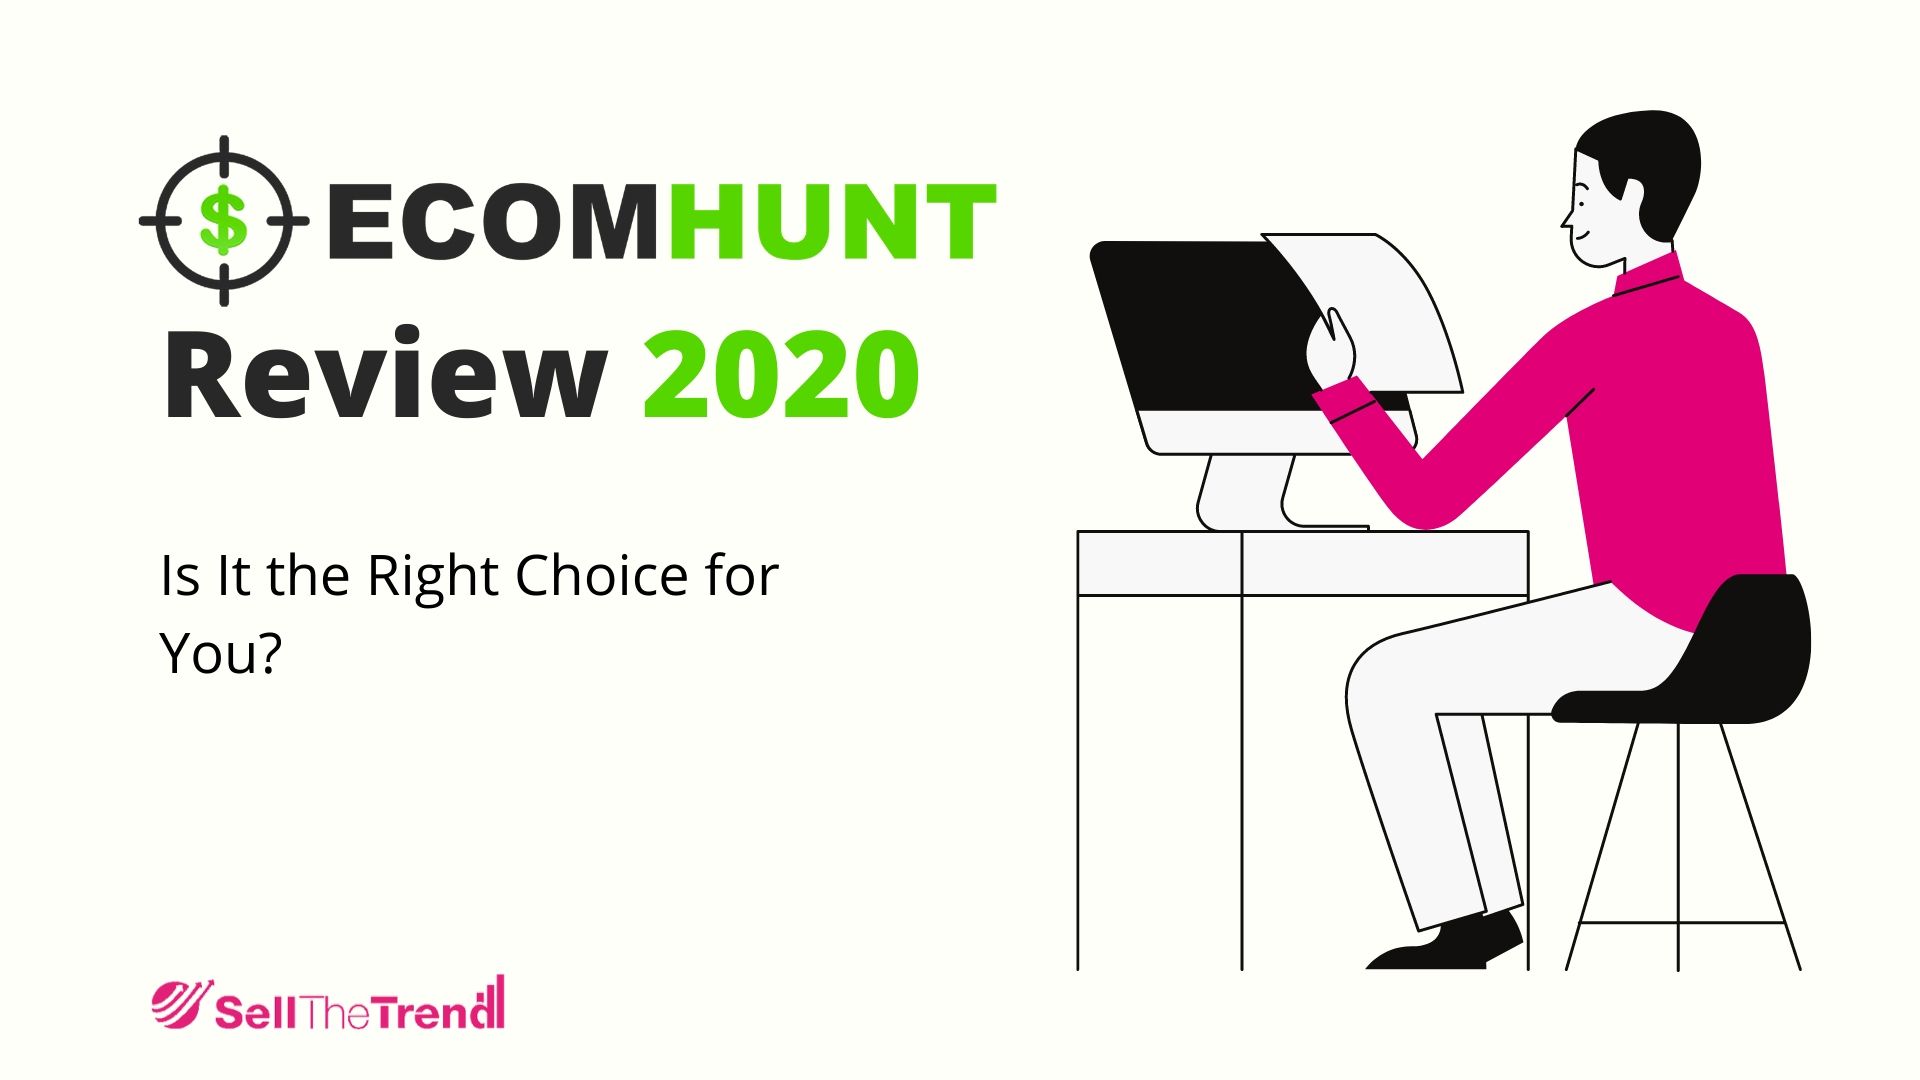 Ecomhunt Review 2020: Can We Find Some Winning Products?